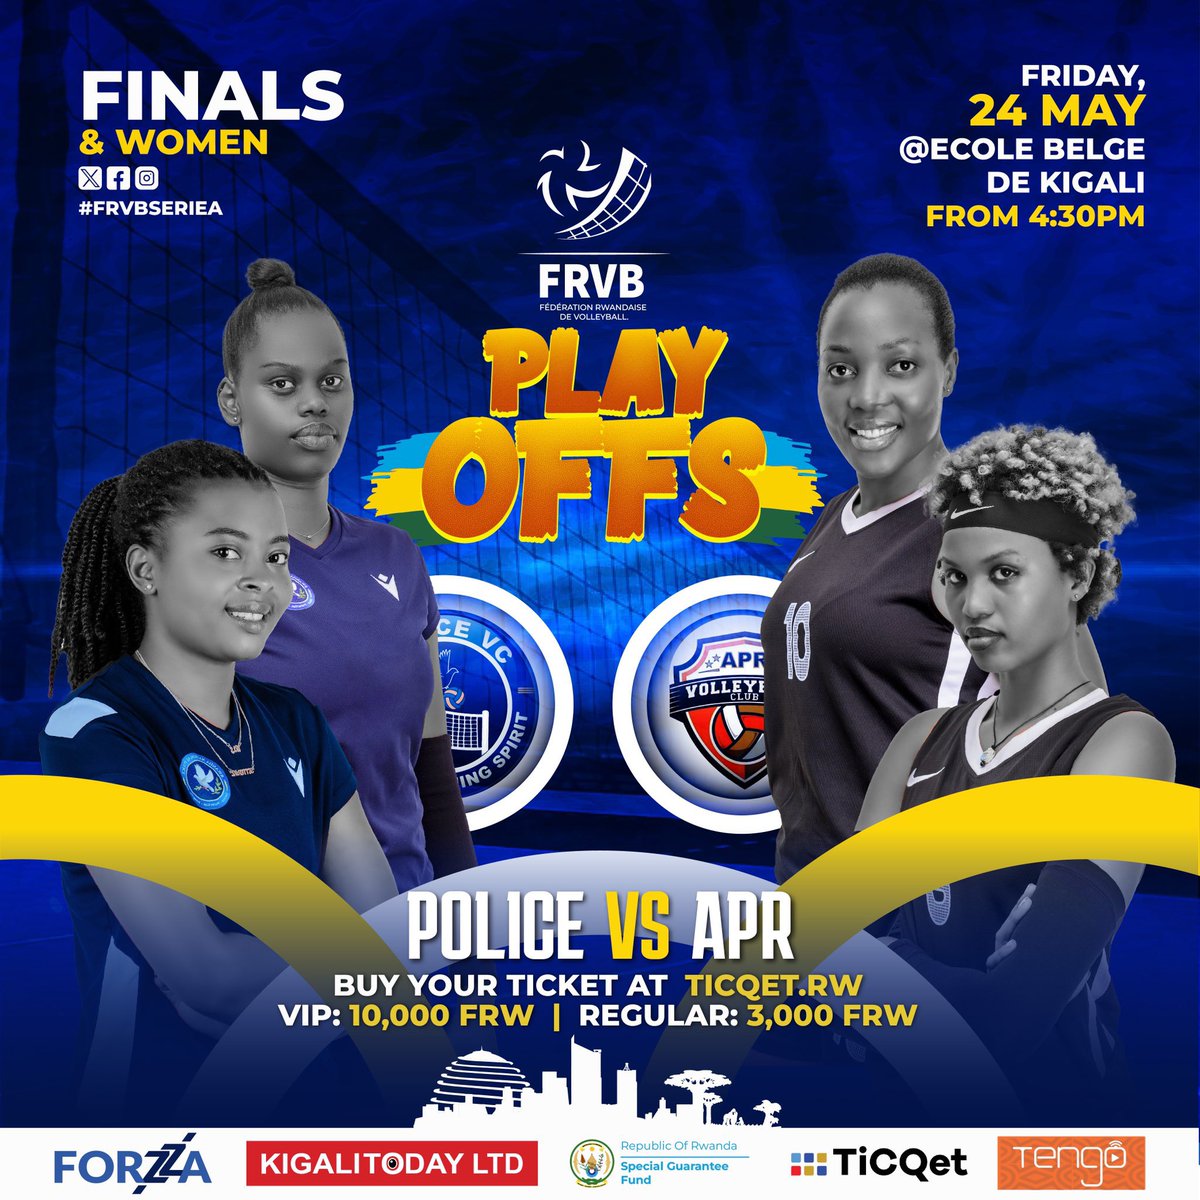 Please don’t plan to miss the finals 

On this Friday 24th -25th May at Ecole Belge de Kigali (Gisozi) 

#rwandavolleyball

APR WILL DO IT? or It’s time for KEPLER??

What about POLICE WVC ?